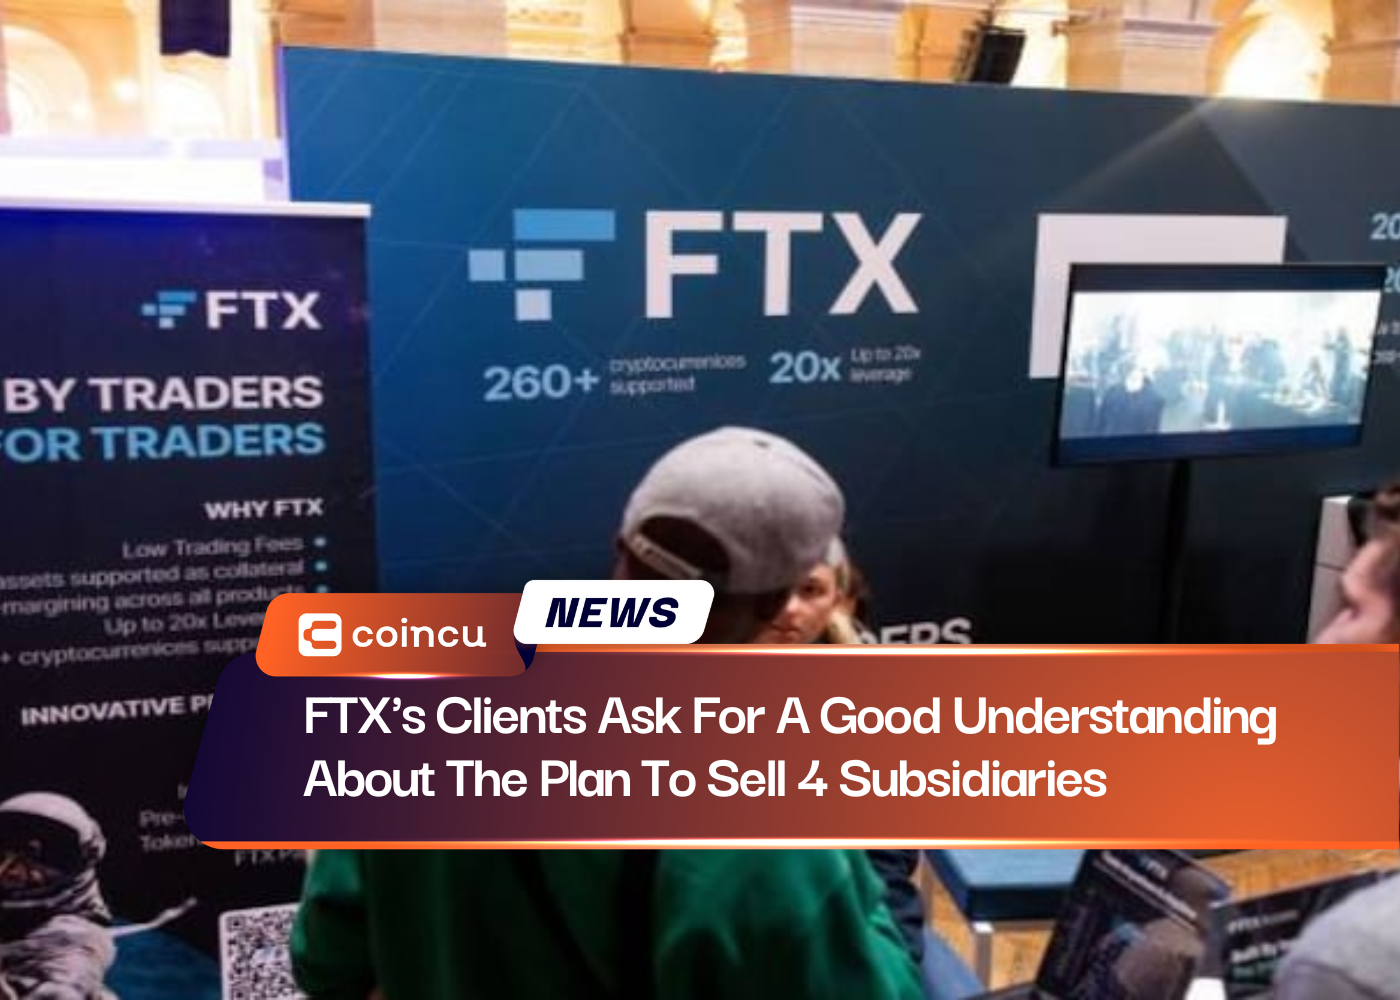 FTX's Clients Ask For A Good Understanding About The Plan To Sell 4 Subsidiaries